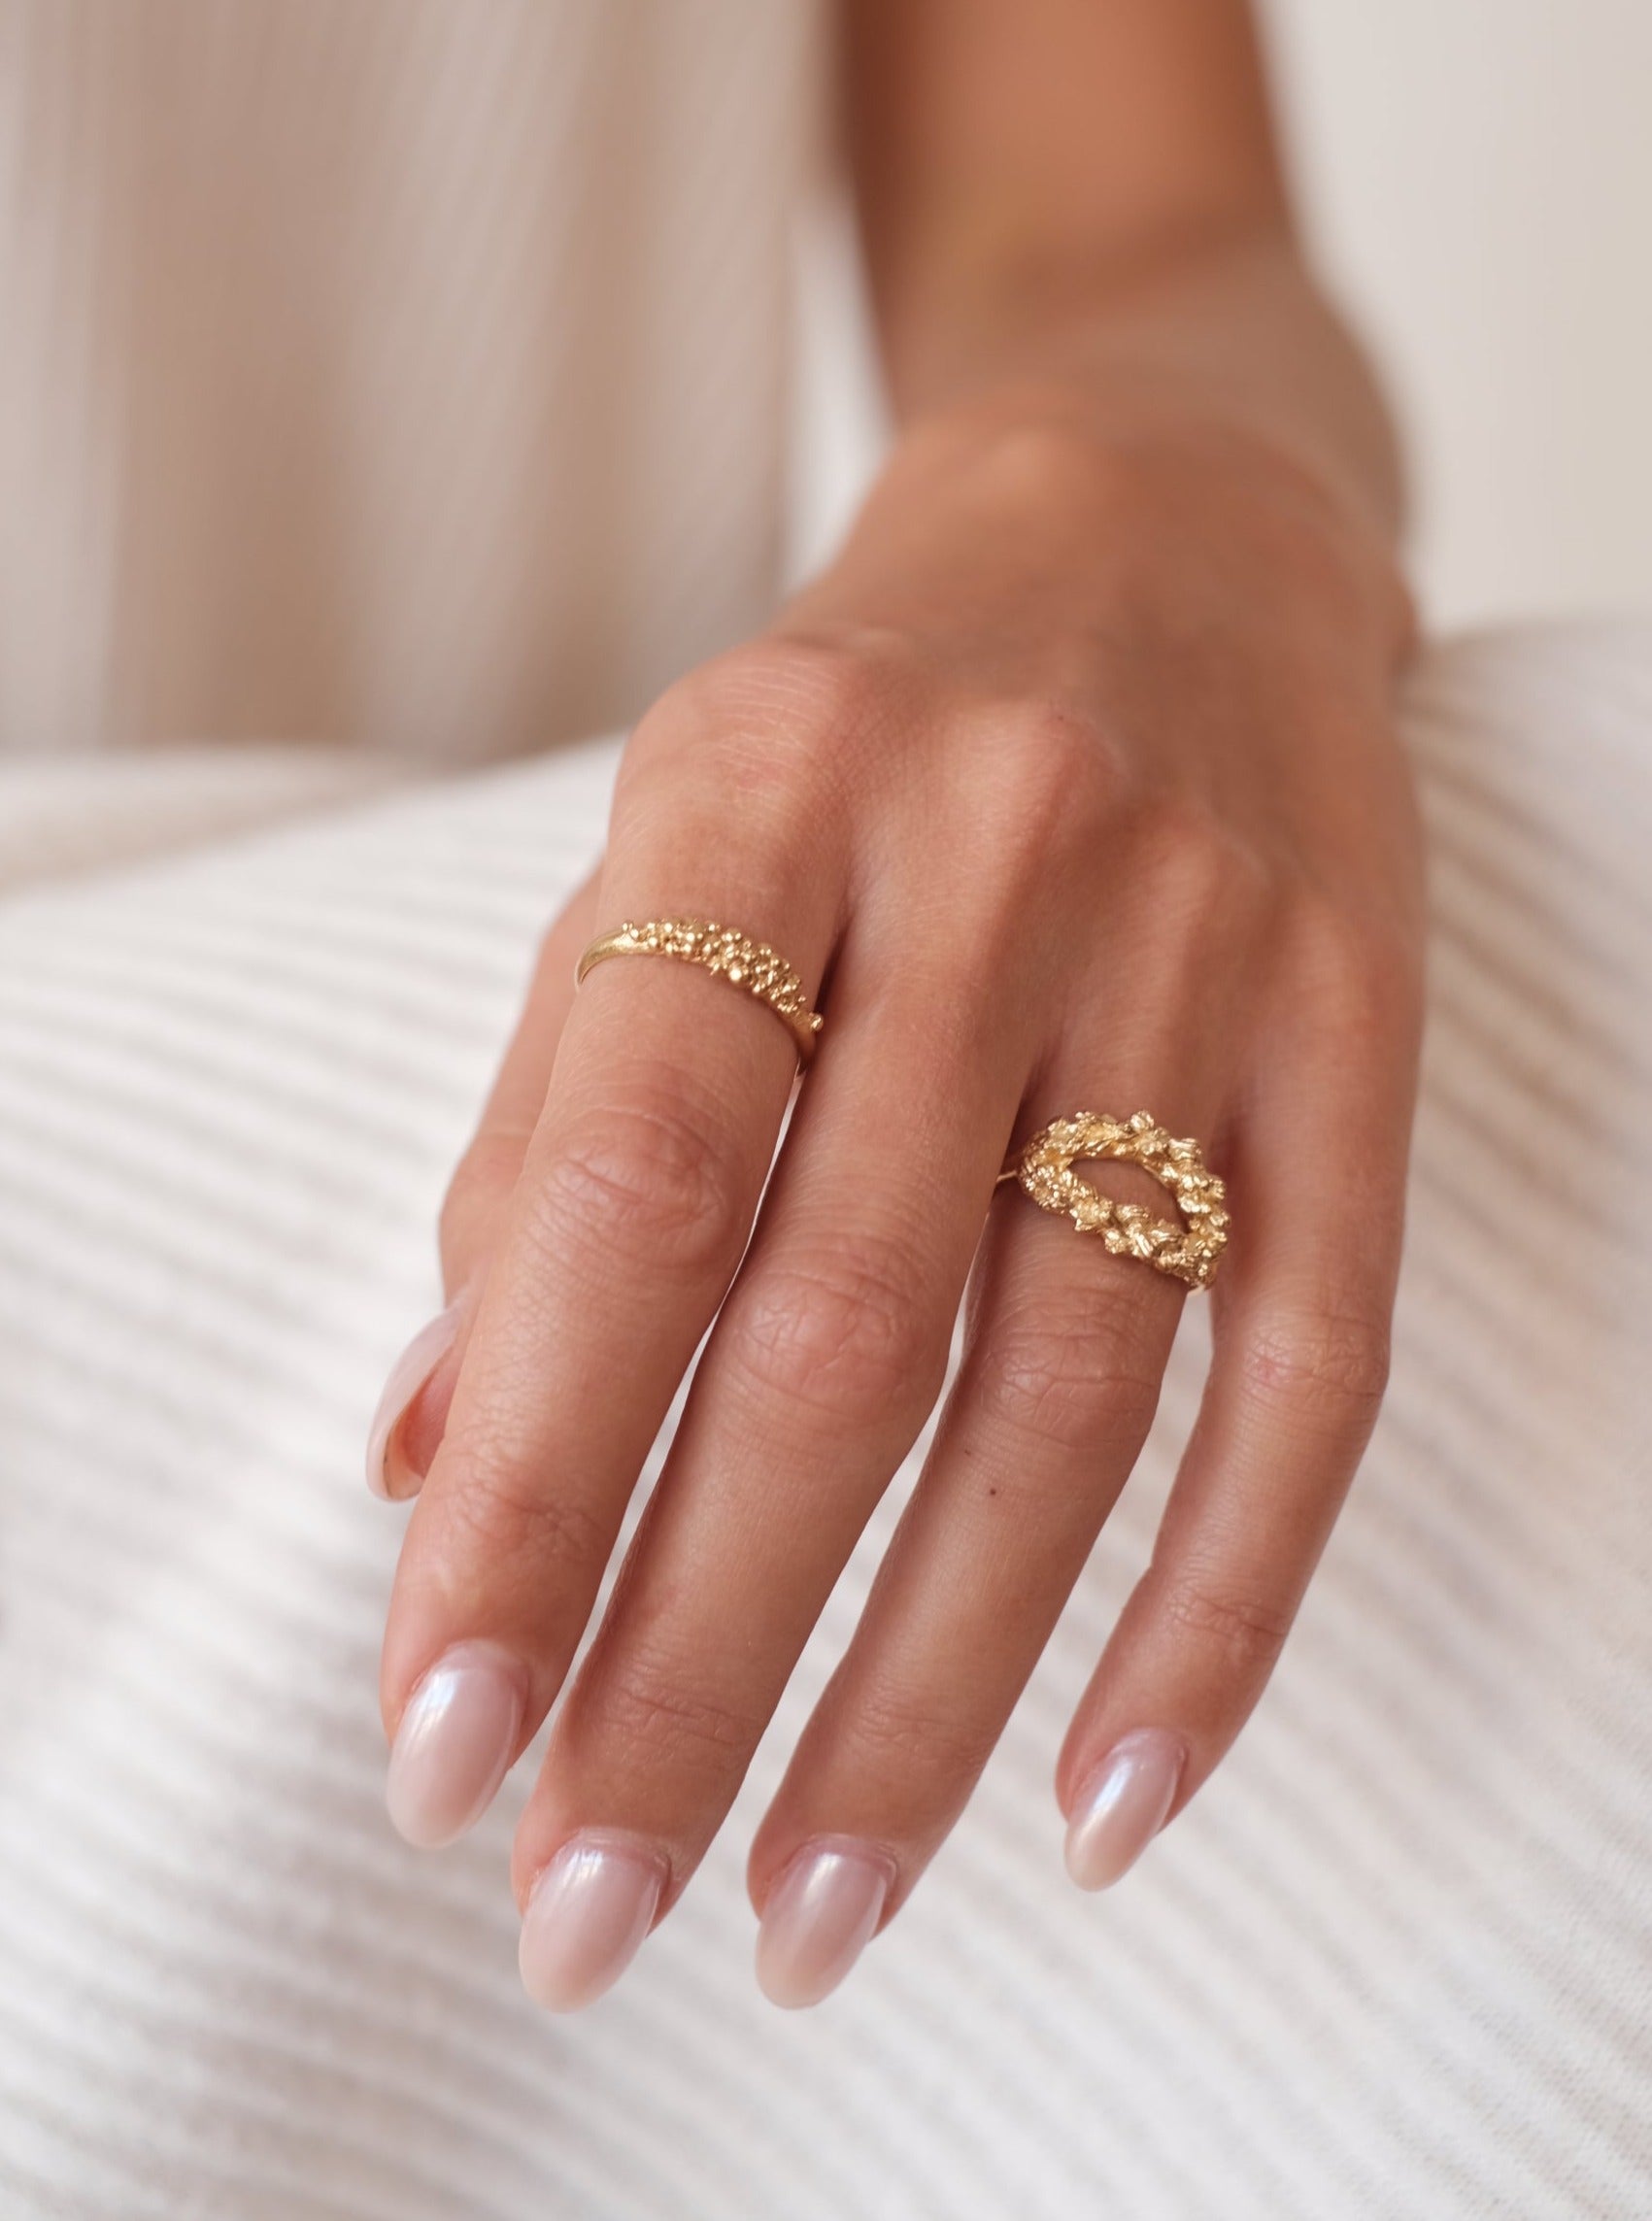 A woman's hand adorned with the Cremilde Bispo Jewellery Essential Dot Ring GP exudes timeless elegance and luxurious sophistication.